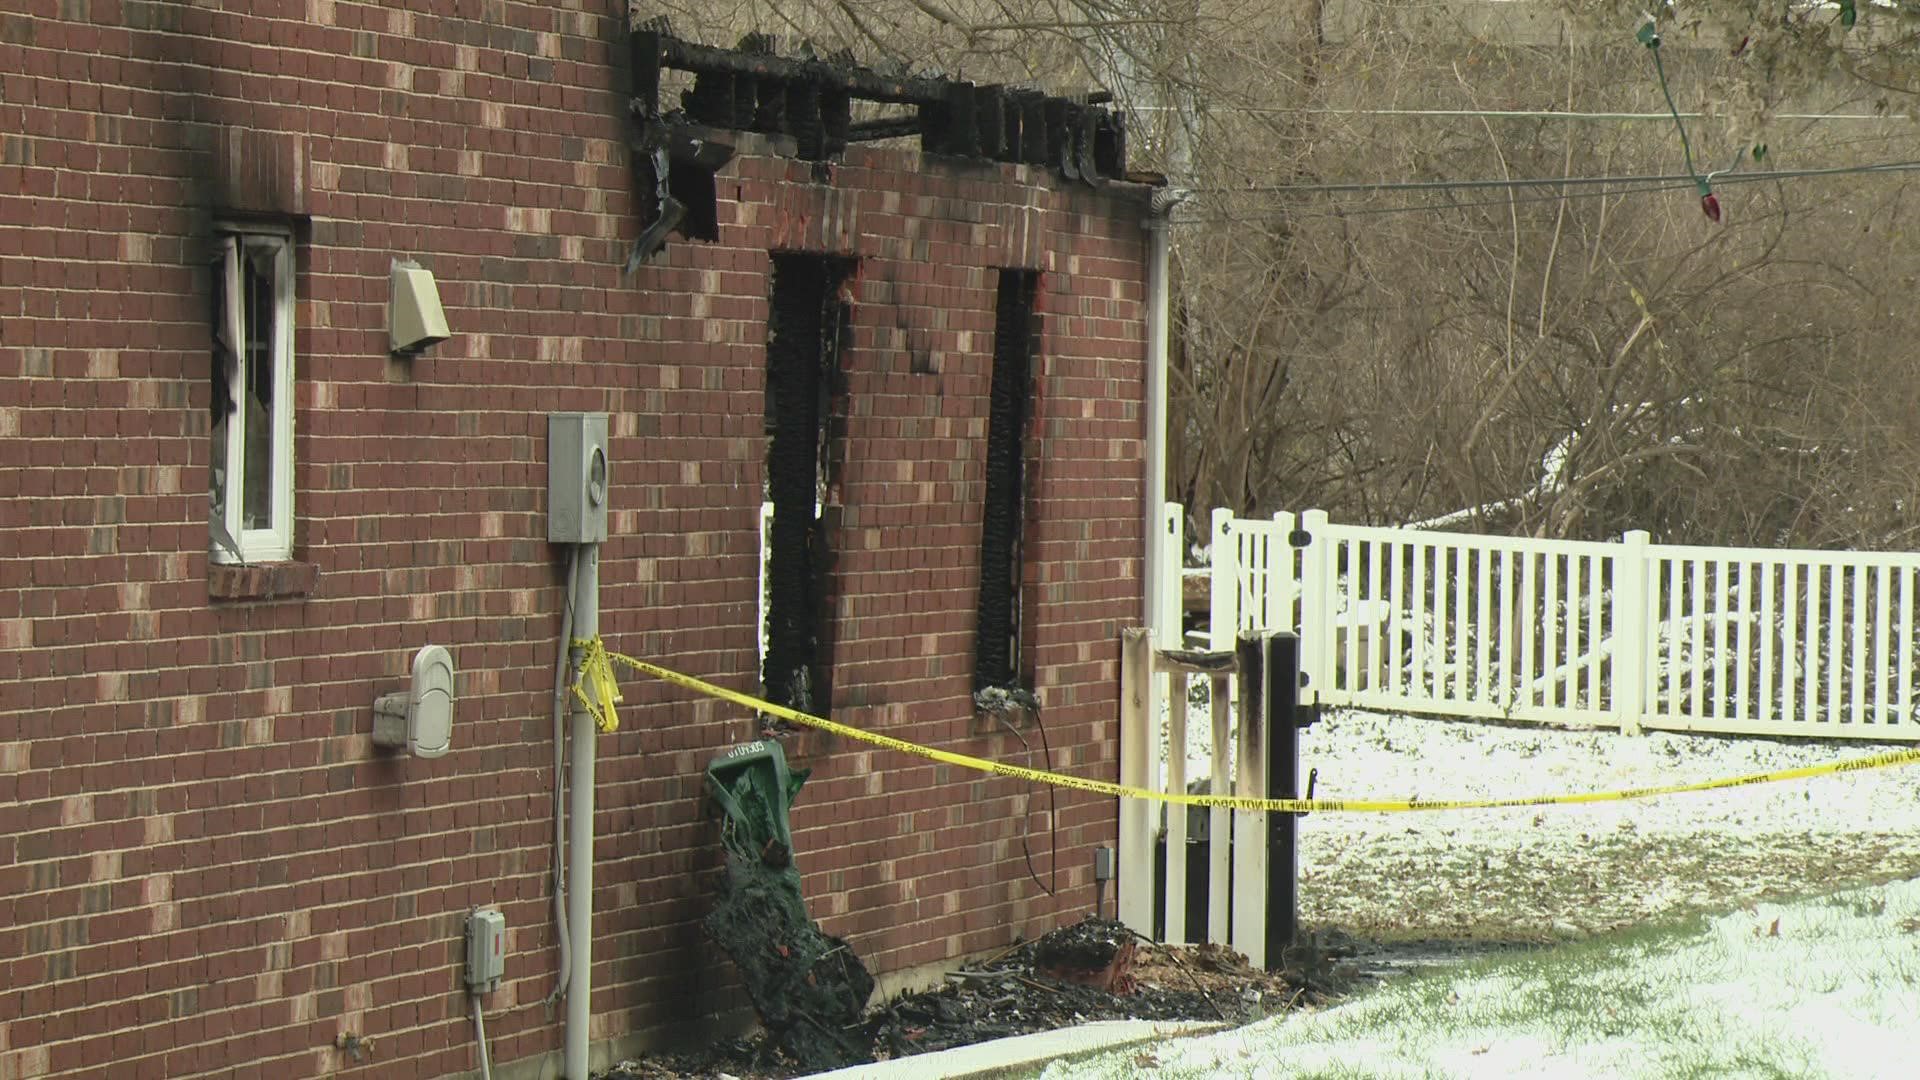 A house fire was under investigation early Monday morning in the City of Webster Groves. The chief said the fire started in the attached garage.